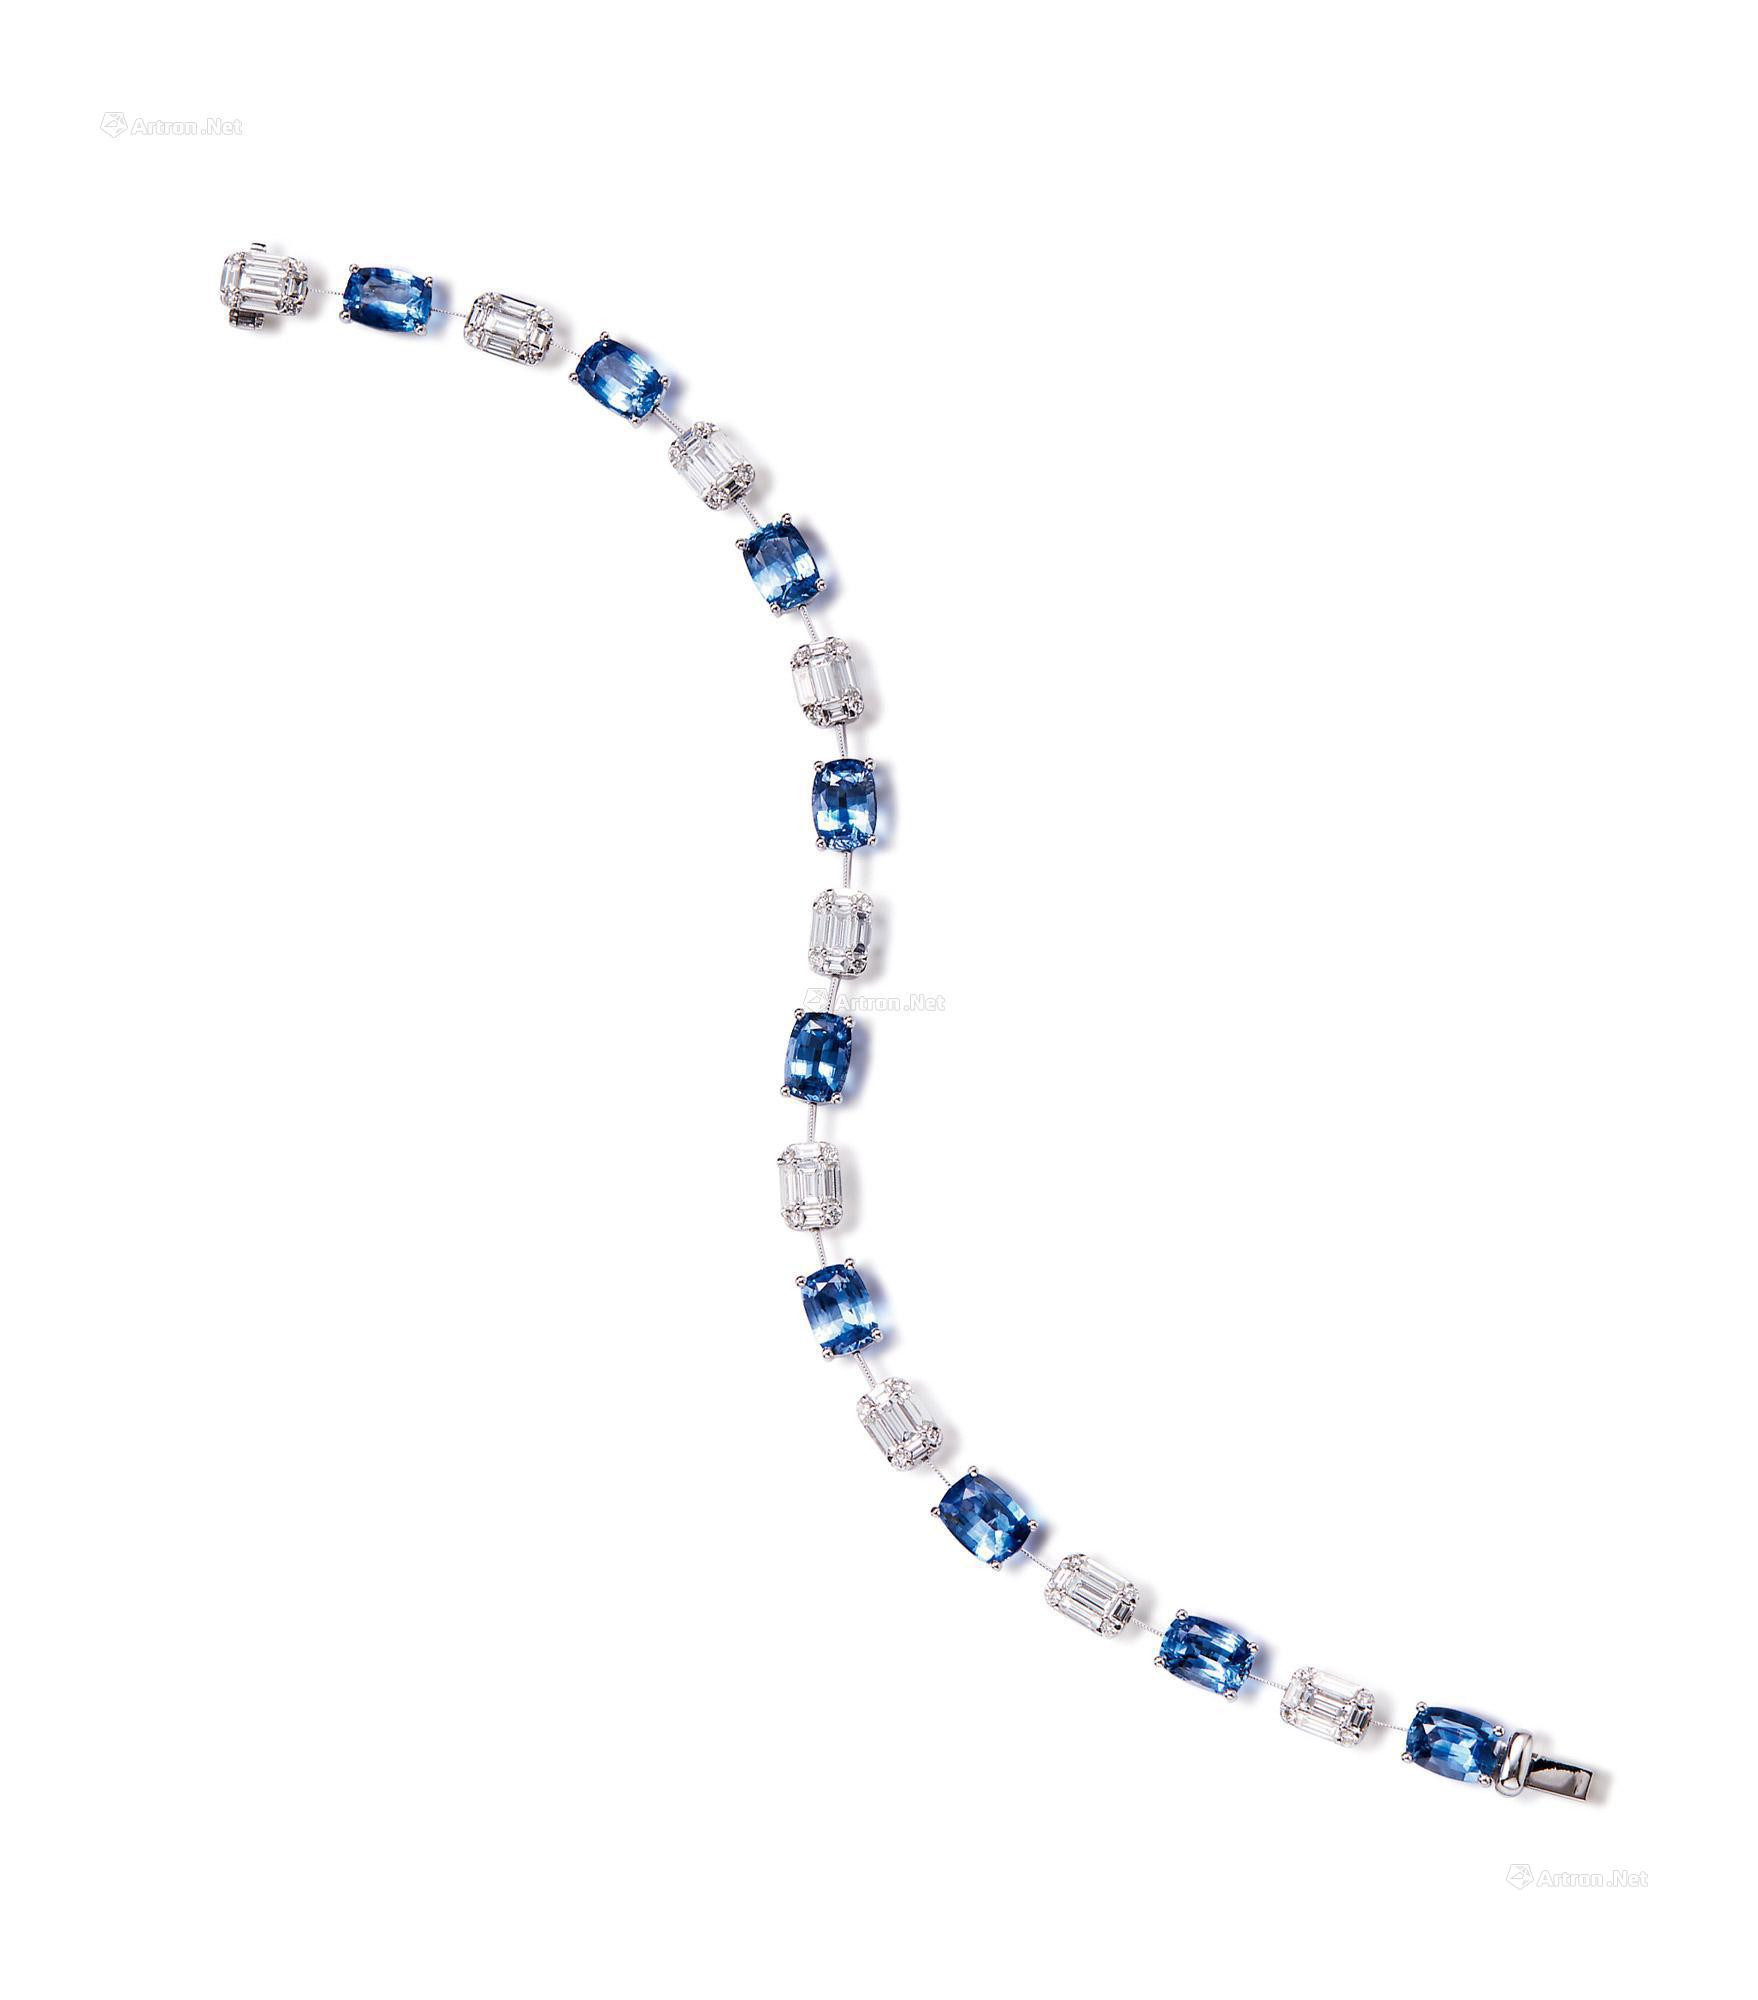 AN ALTOGETHER WEIGHING 8.43 CARATS SAPPHIRE AND DIAMOND BRACELET MOUNTED IN 18K WHITE GOLD